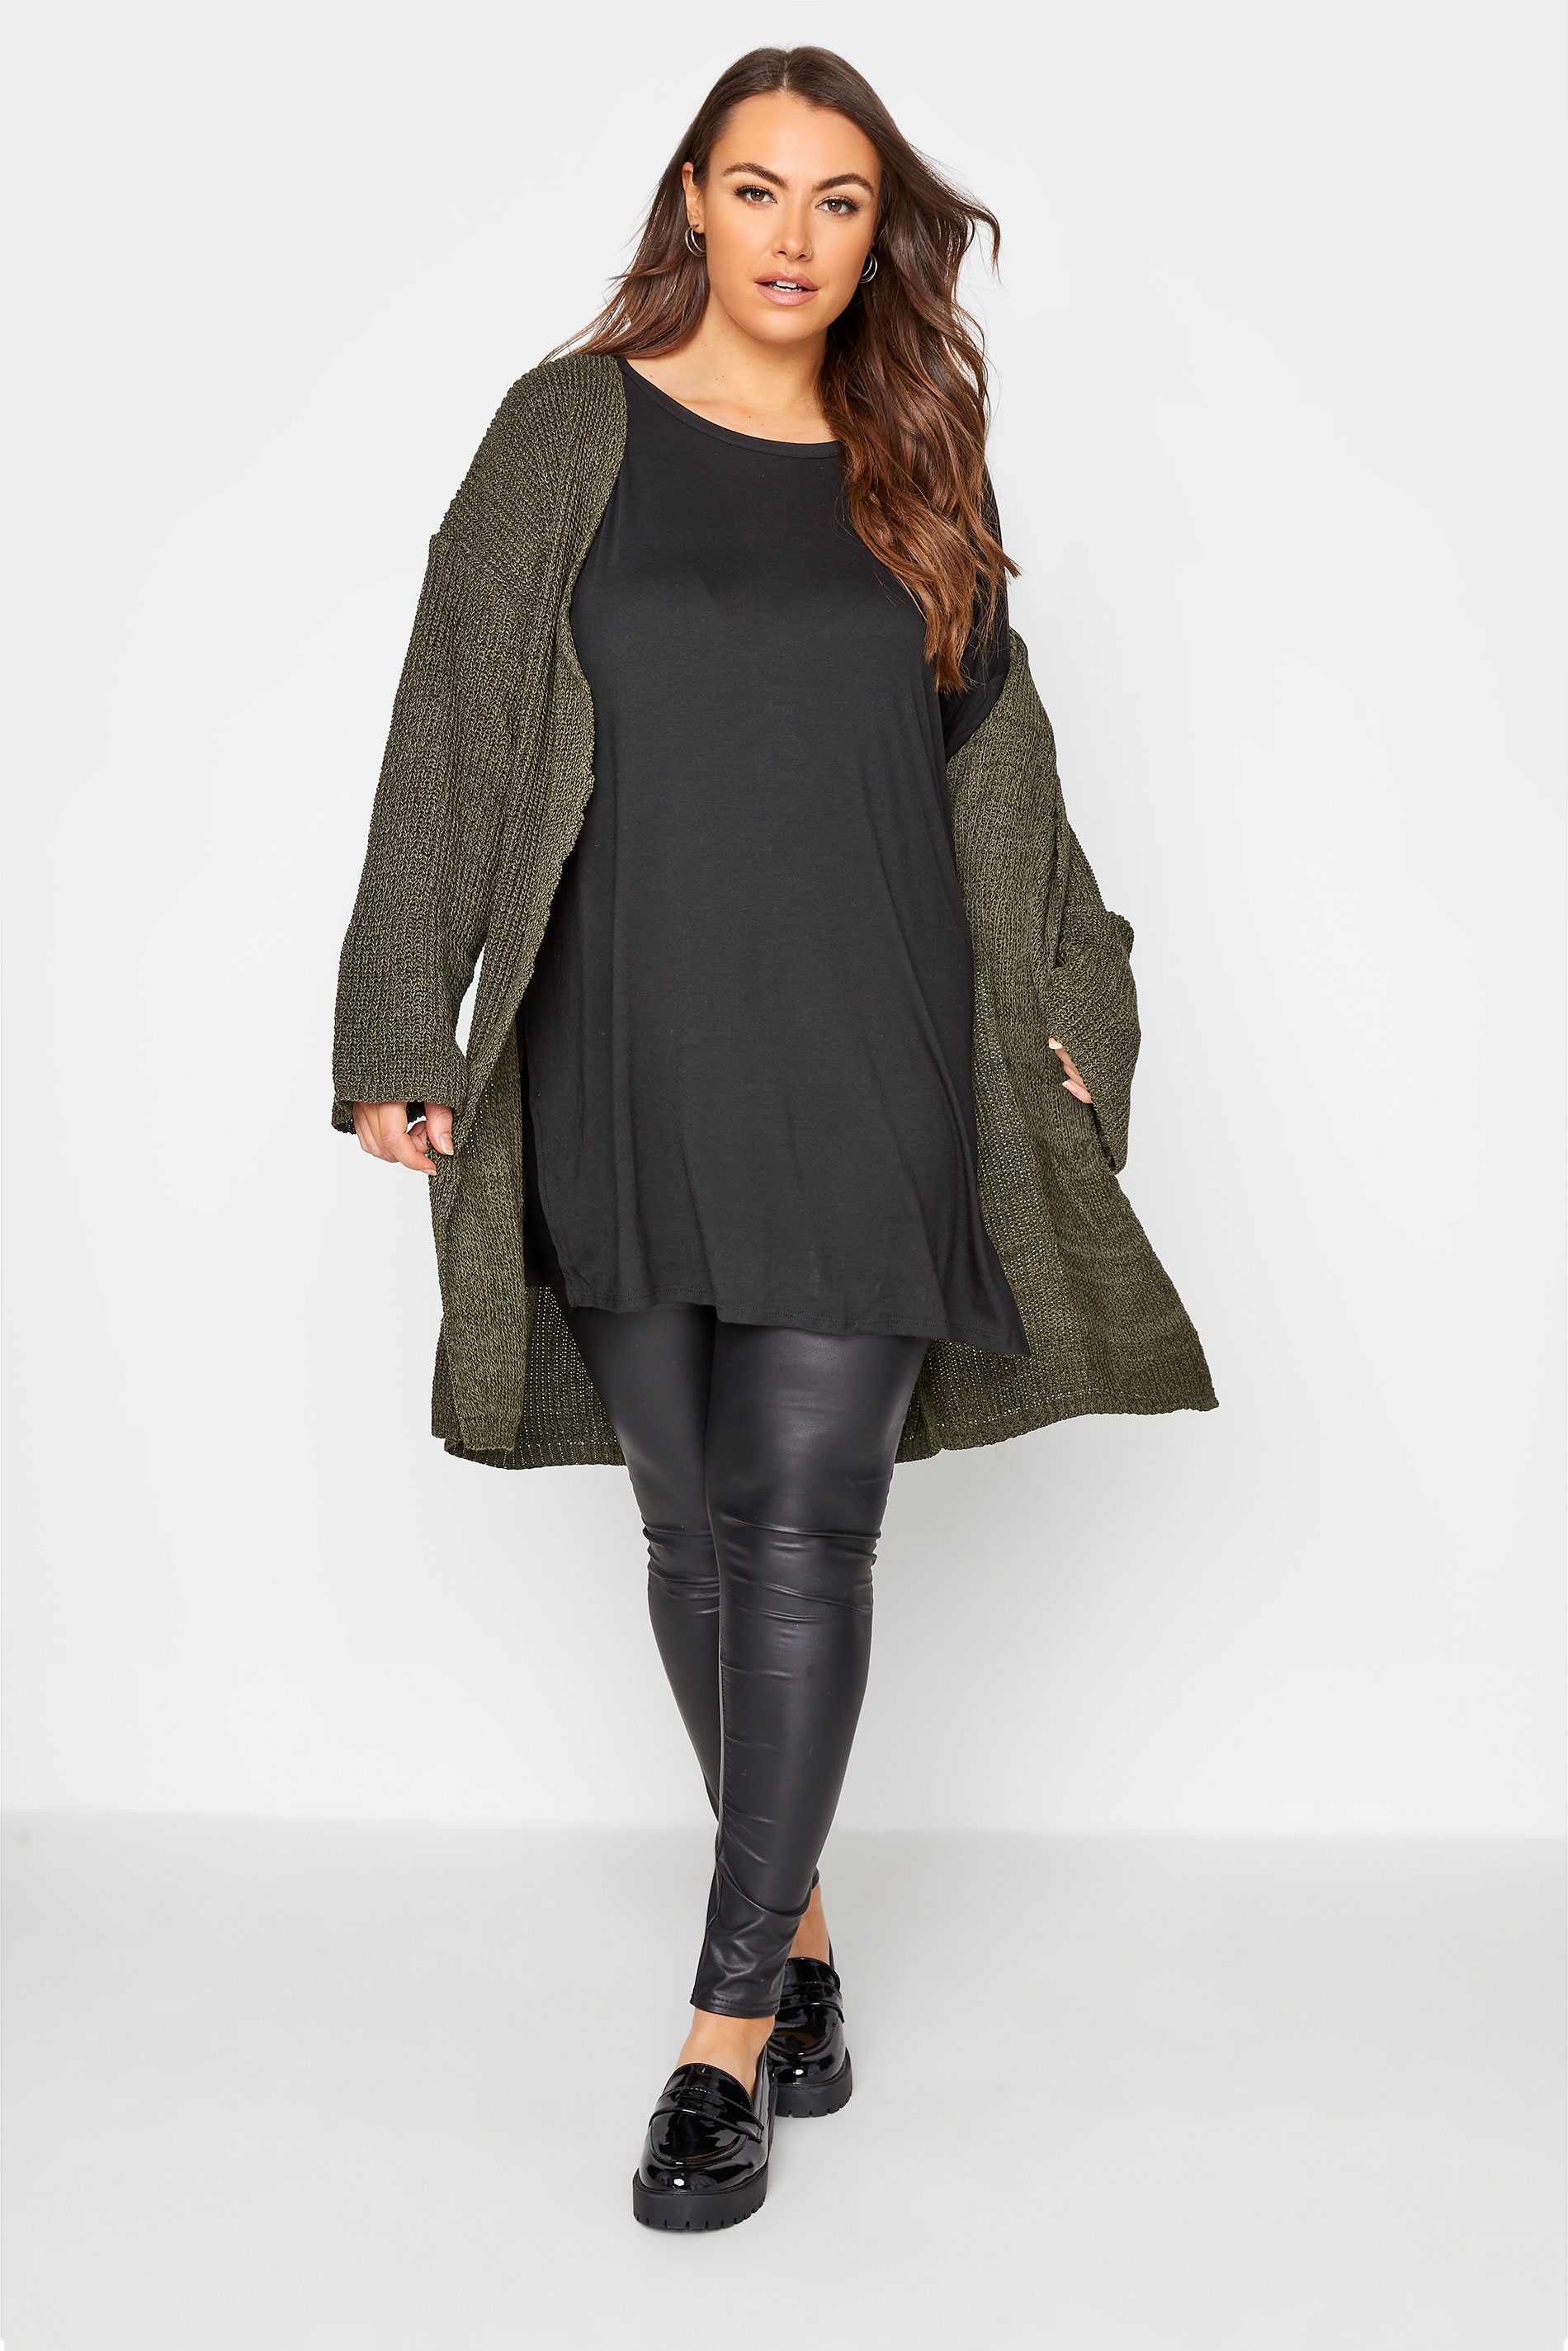 Grande taille  Tops Grande taille  Tops à Manches Longues | T-Shirt Noir Long Style Oversize - OI63540